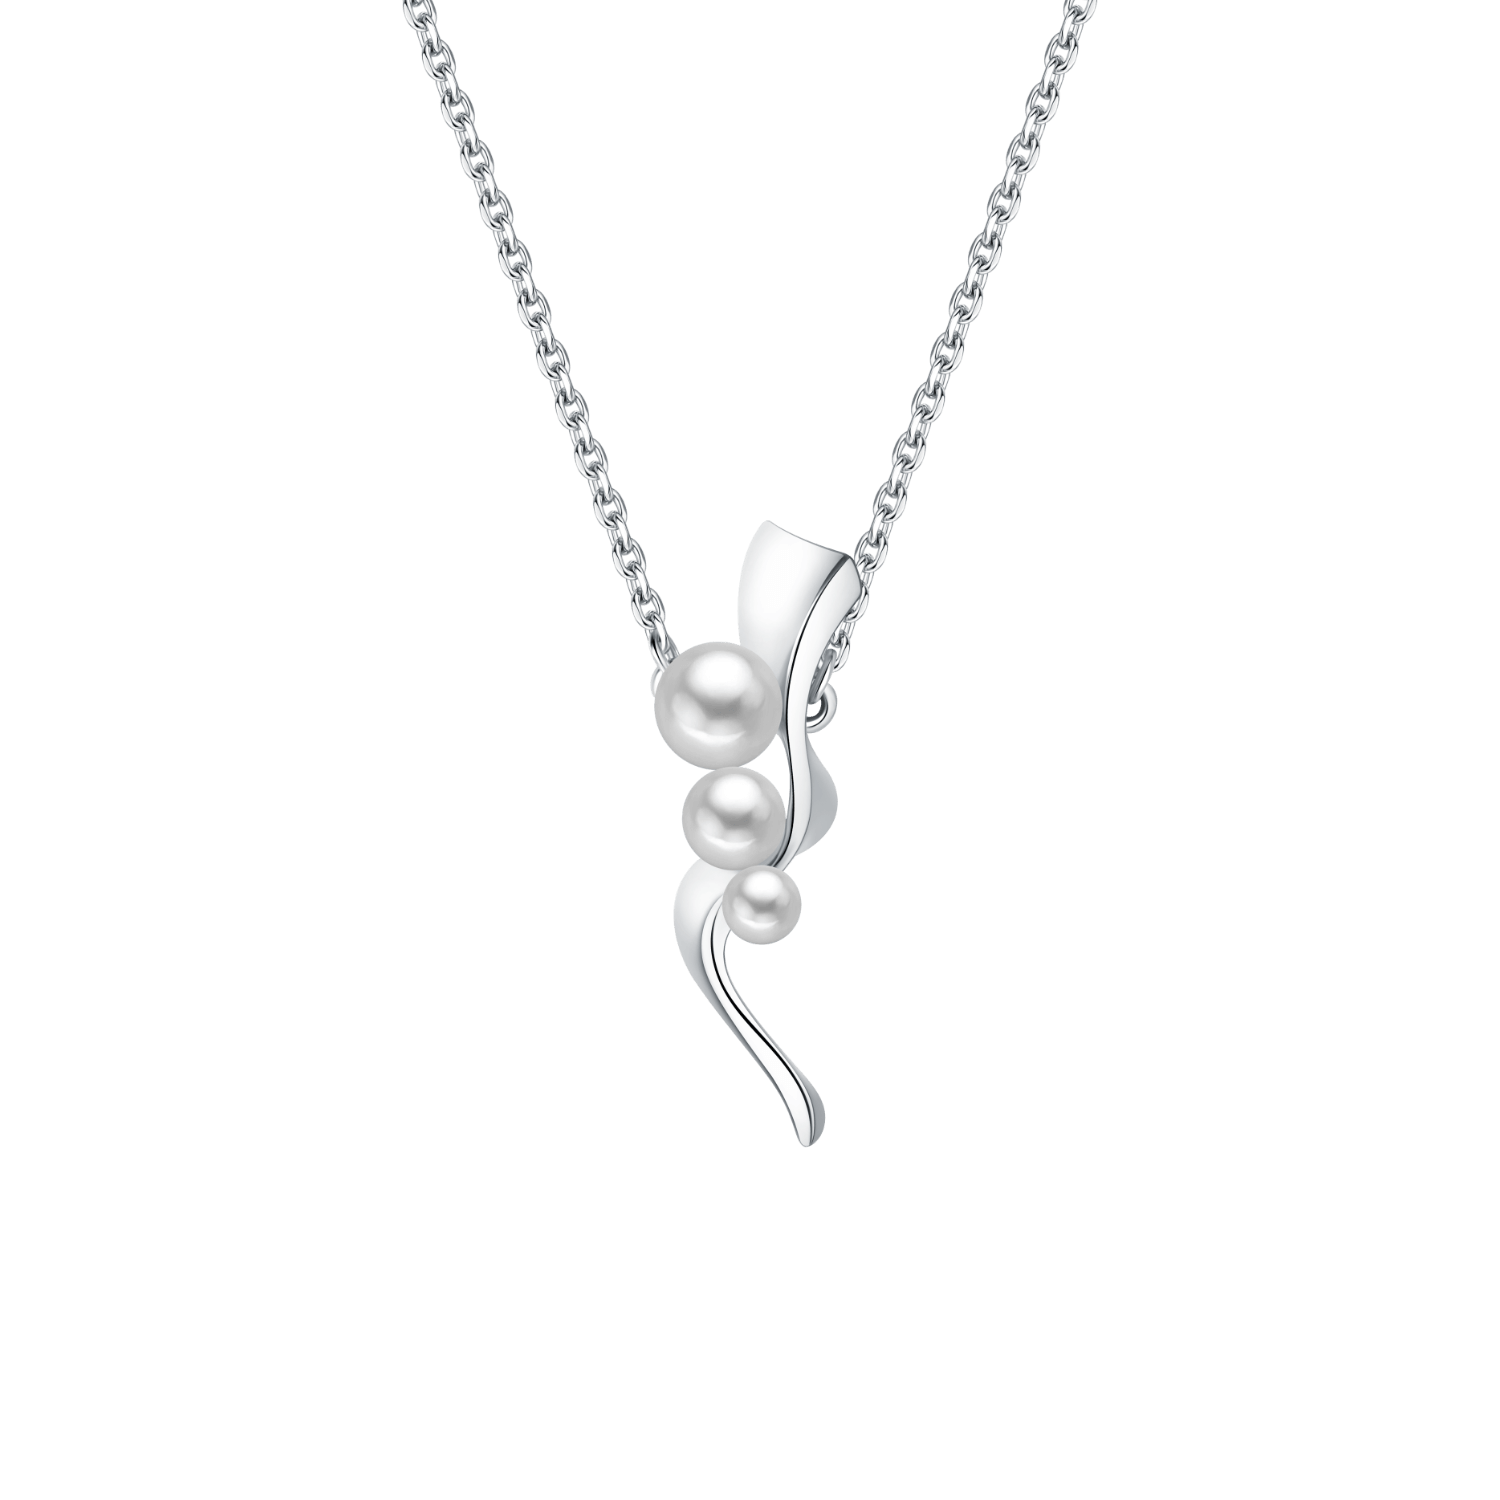 Surfing Pendant Necklace